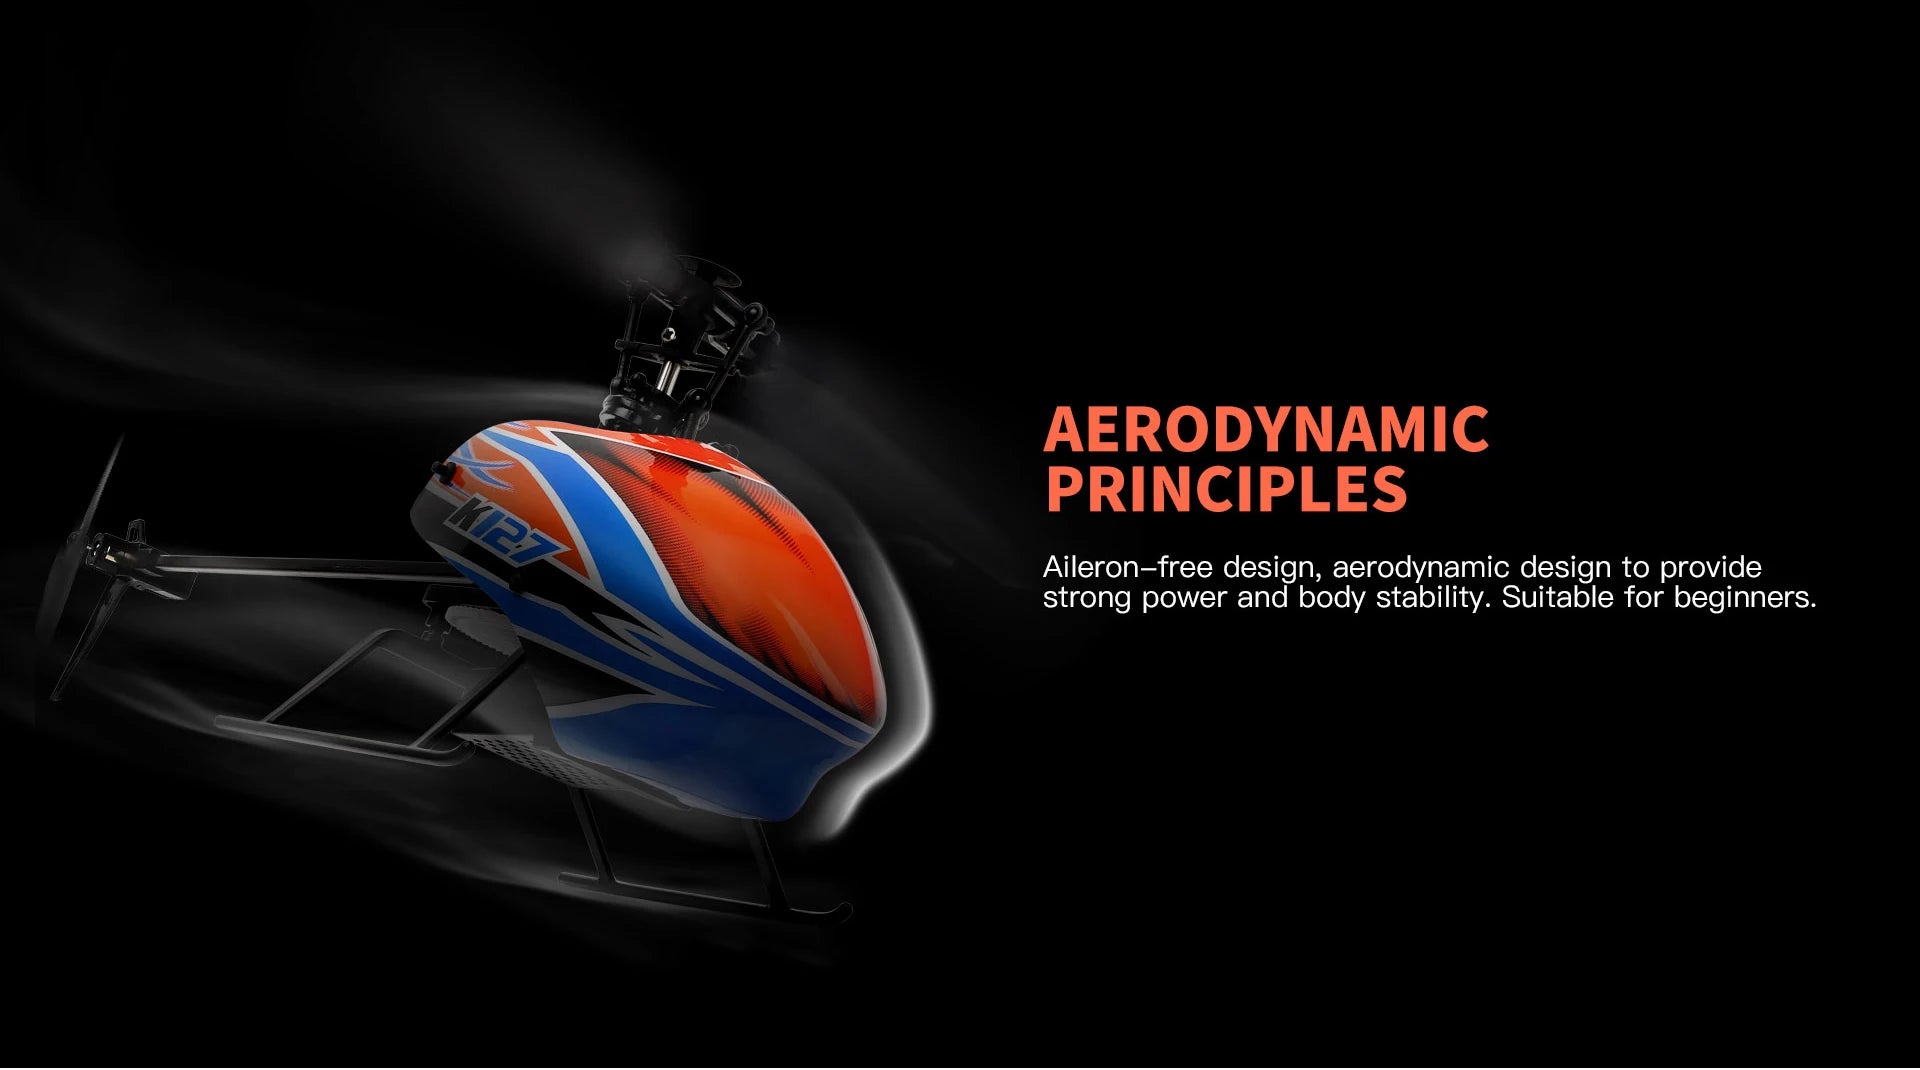 Wltoys K127 Rc Helicopter, Suitable for beginners: KBZ . aerodynamic design to provide strong power and body